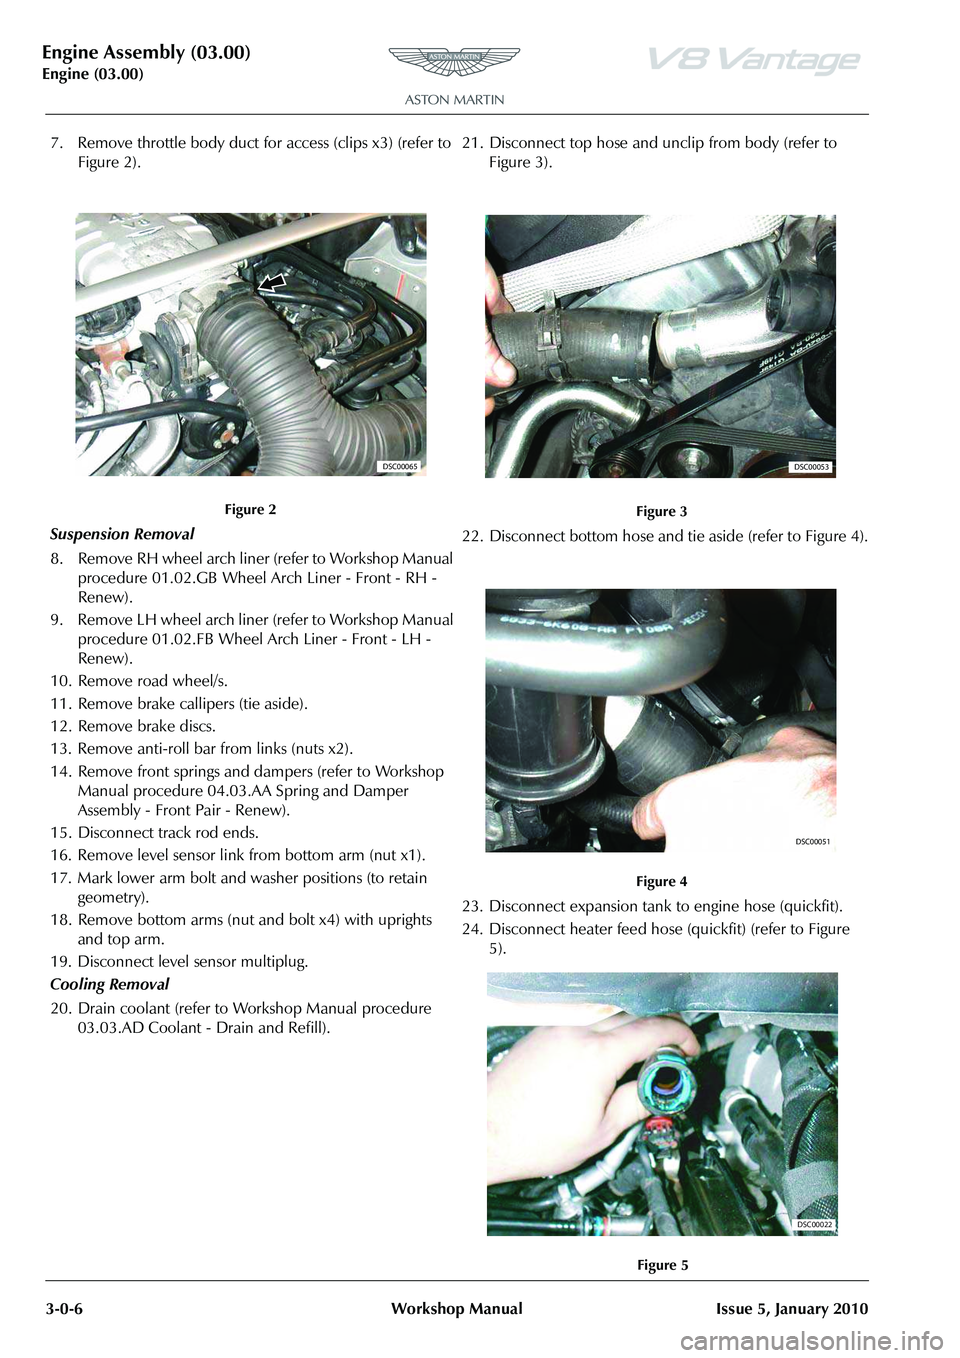 ASTON MARTIN V8 VANTAGE 2010  Workshop Manual Engine Assembly (03.00)
Engine (03.00)3-0-6 Workshop Manual Issue 5, January 2010
7. Remove throttle body duct for access (clips x3) (refer to  Figure 2).
Suspension Removal
8. Remove RH wheel arch li